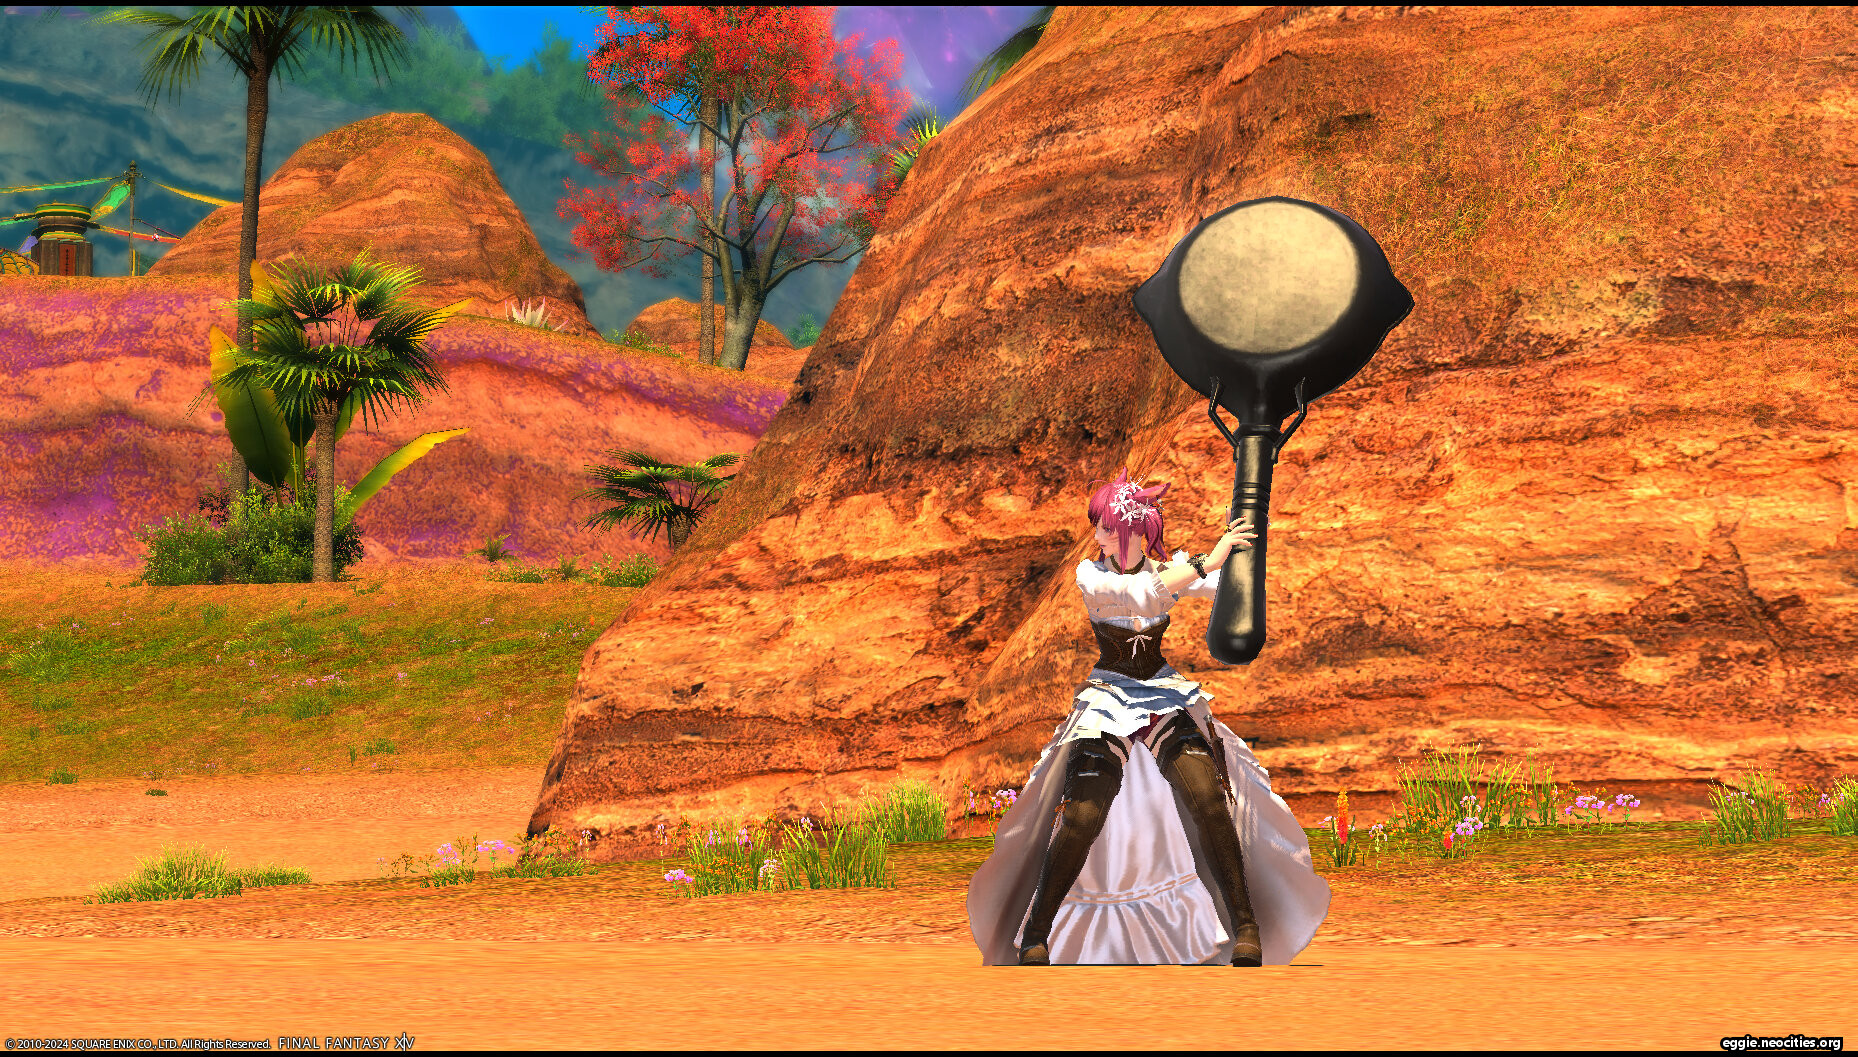 Zel holding a gigantic iron skillet like it is a baseball bat. The skillet is as tall as she is (roughly five feet long).